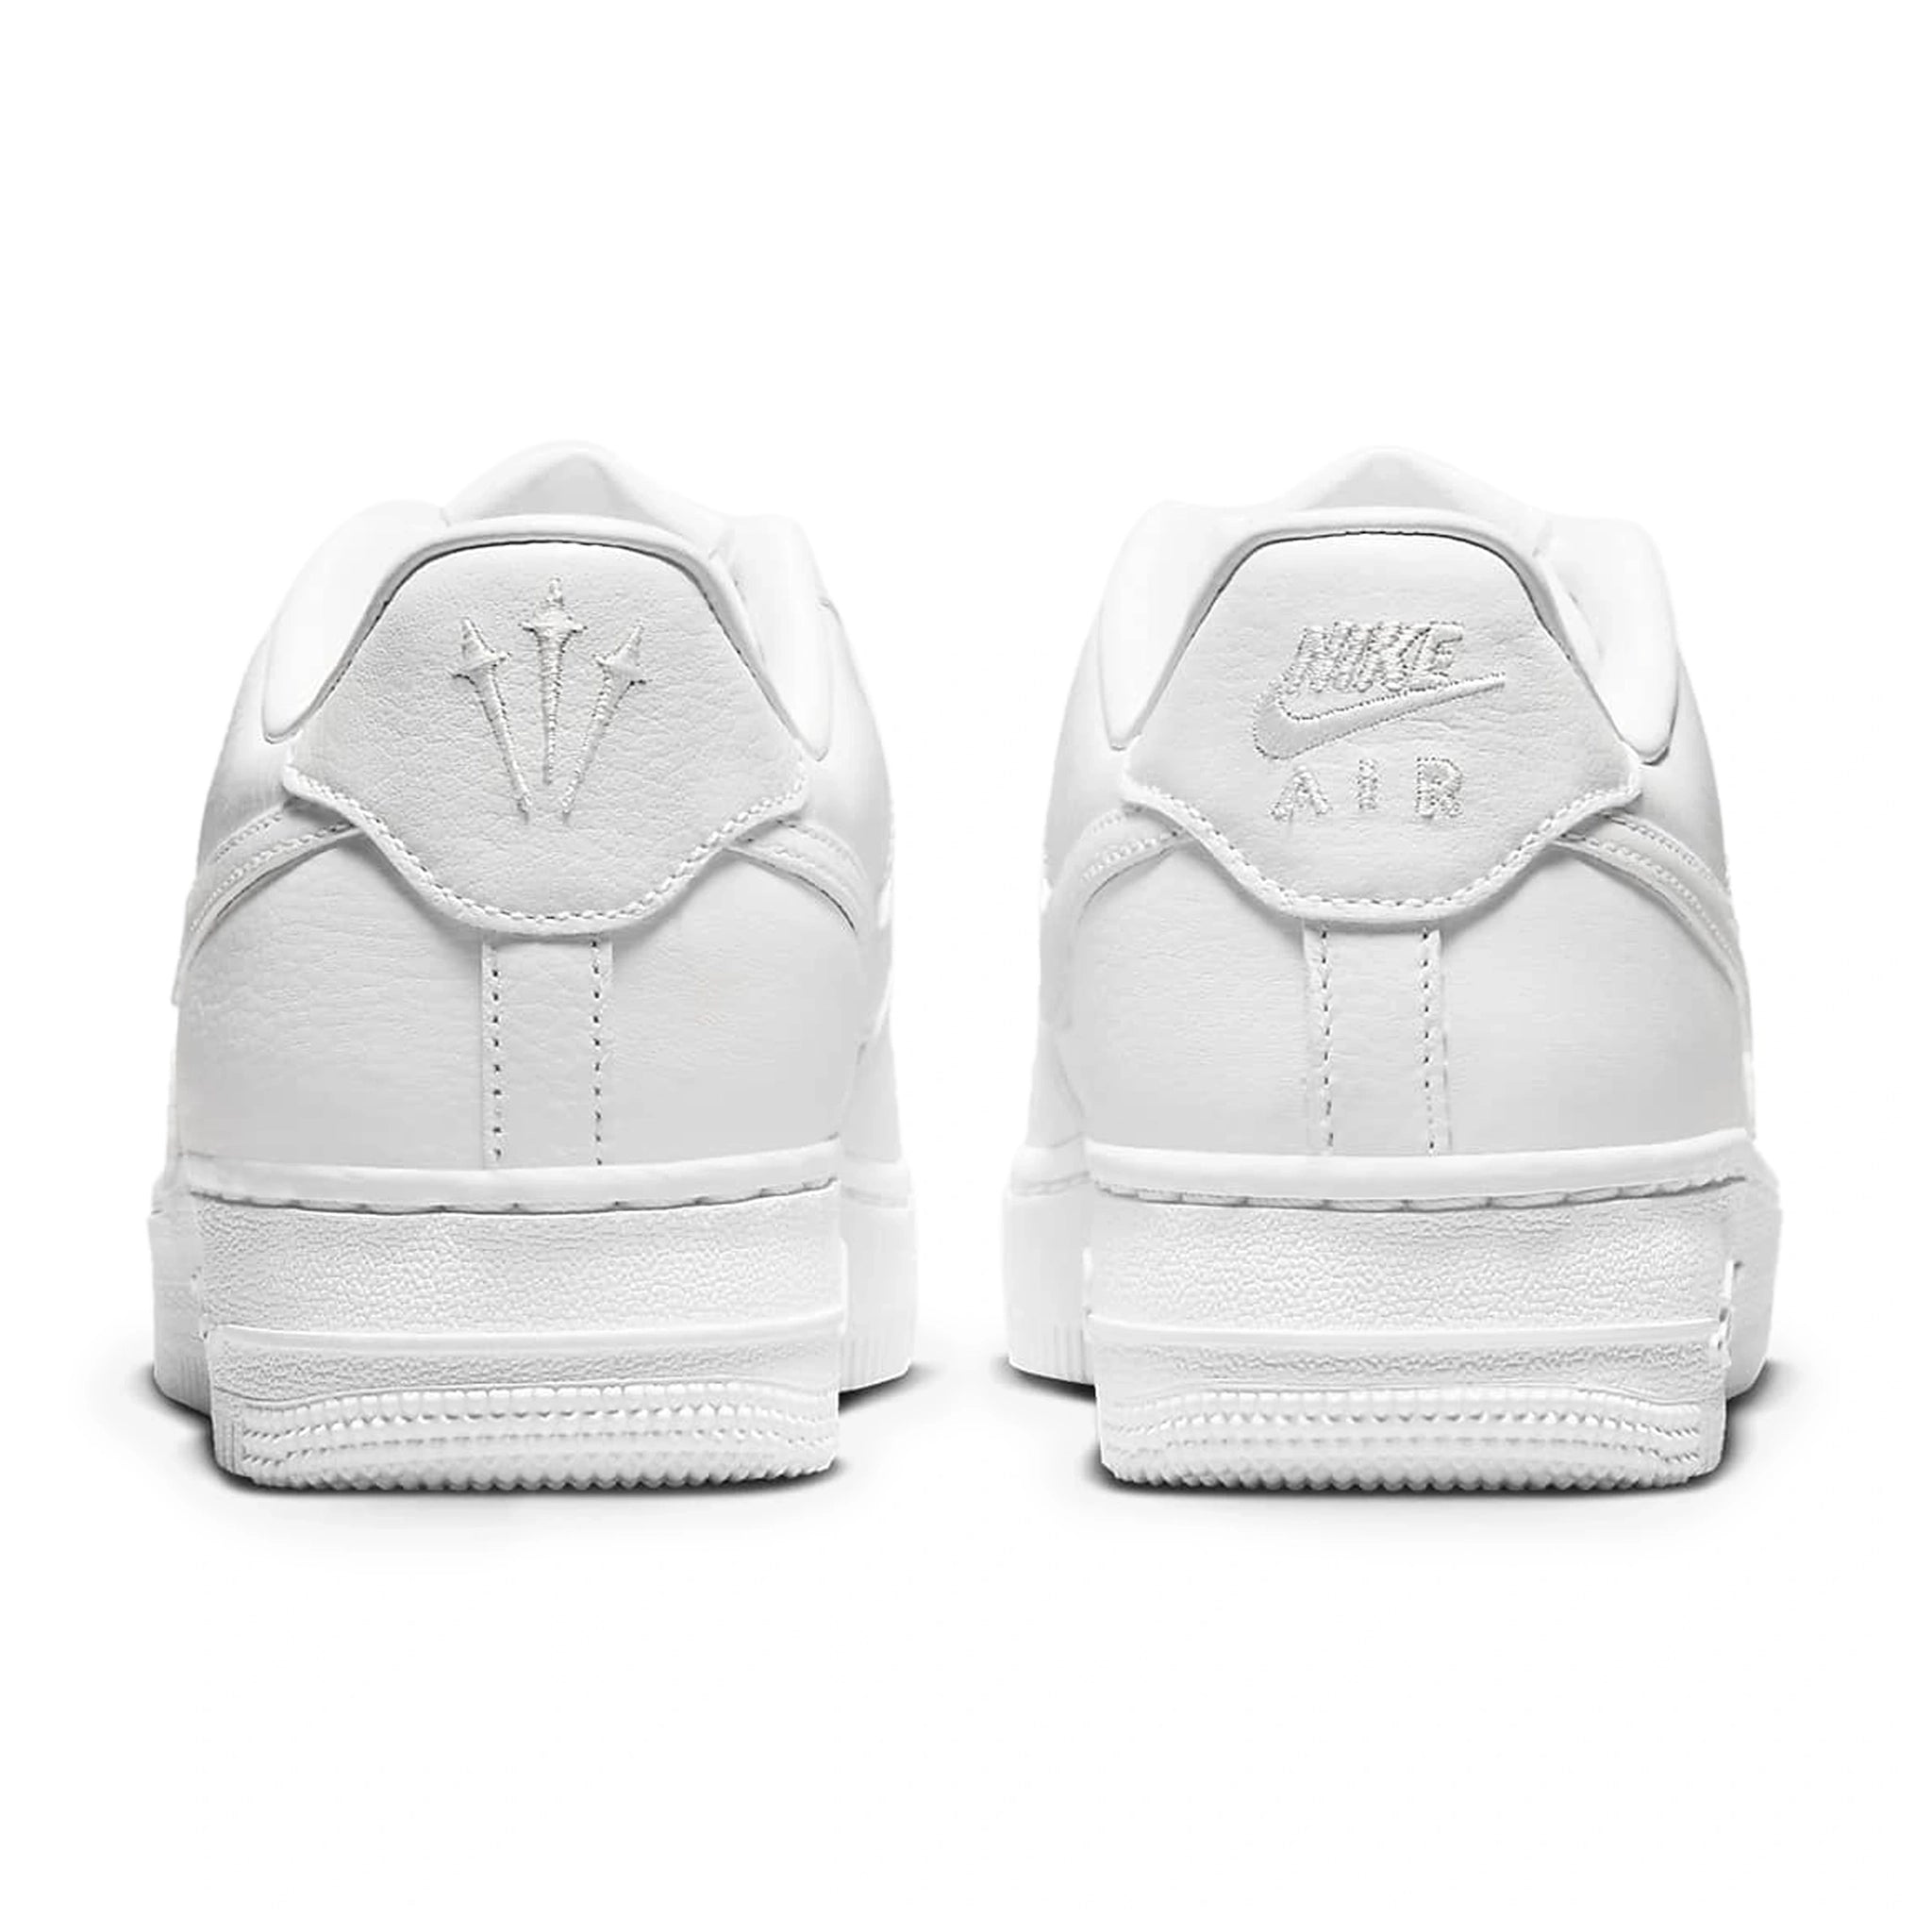 Back view of Nike x Nocta Air Force 1 Low Drake Certified Lover Boy (GS) FV9918-100